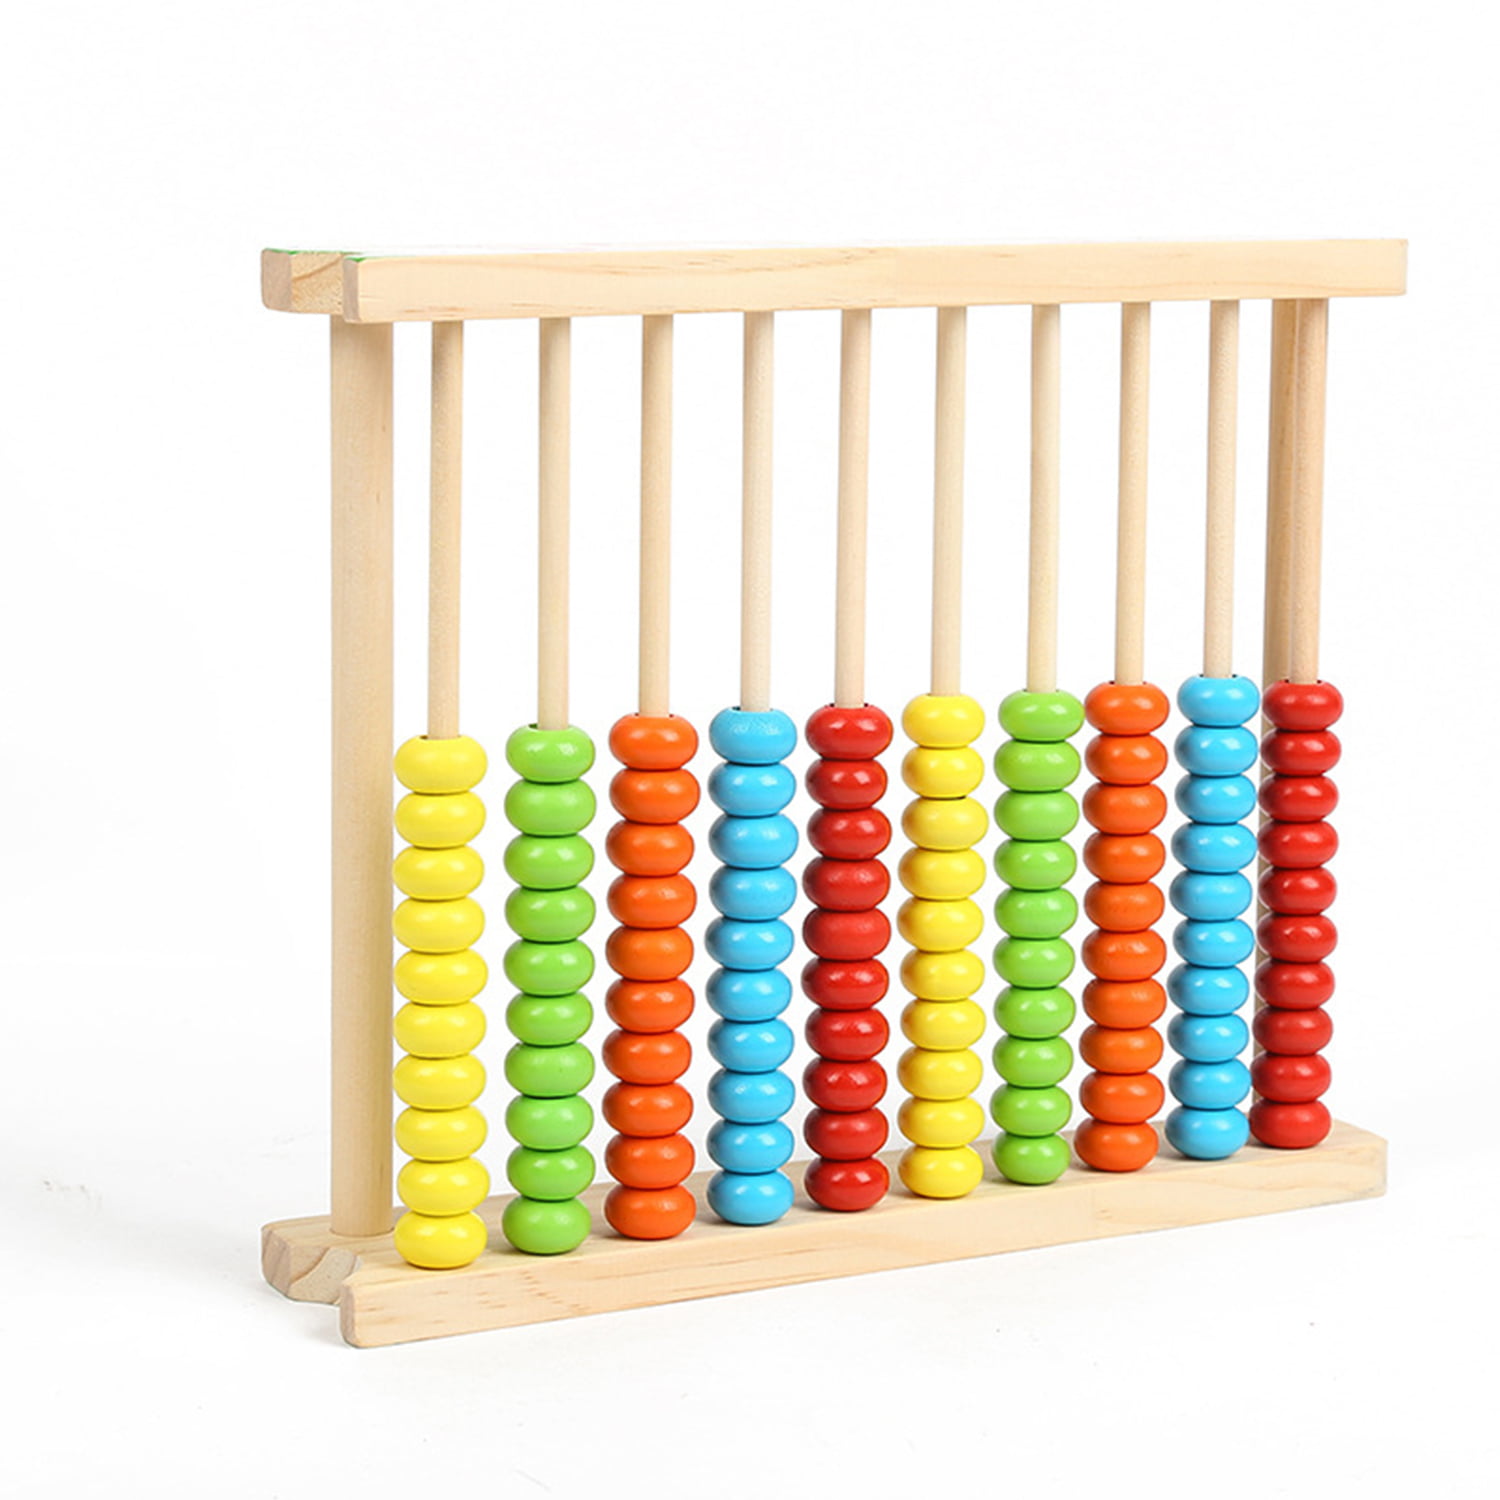 Large Wooden Abacus Counting Number Frame Learning Maths Toy Made of Real Wood 